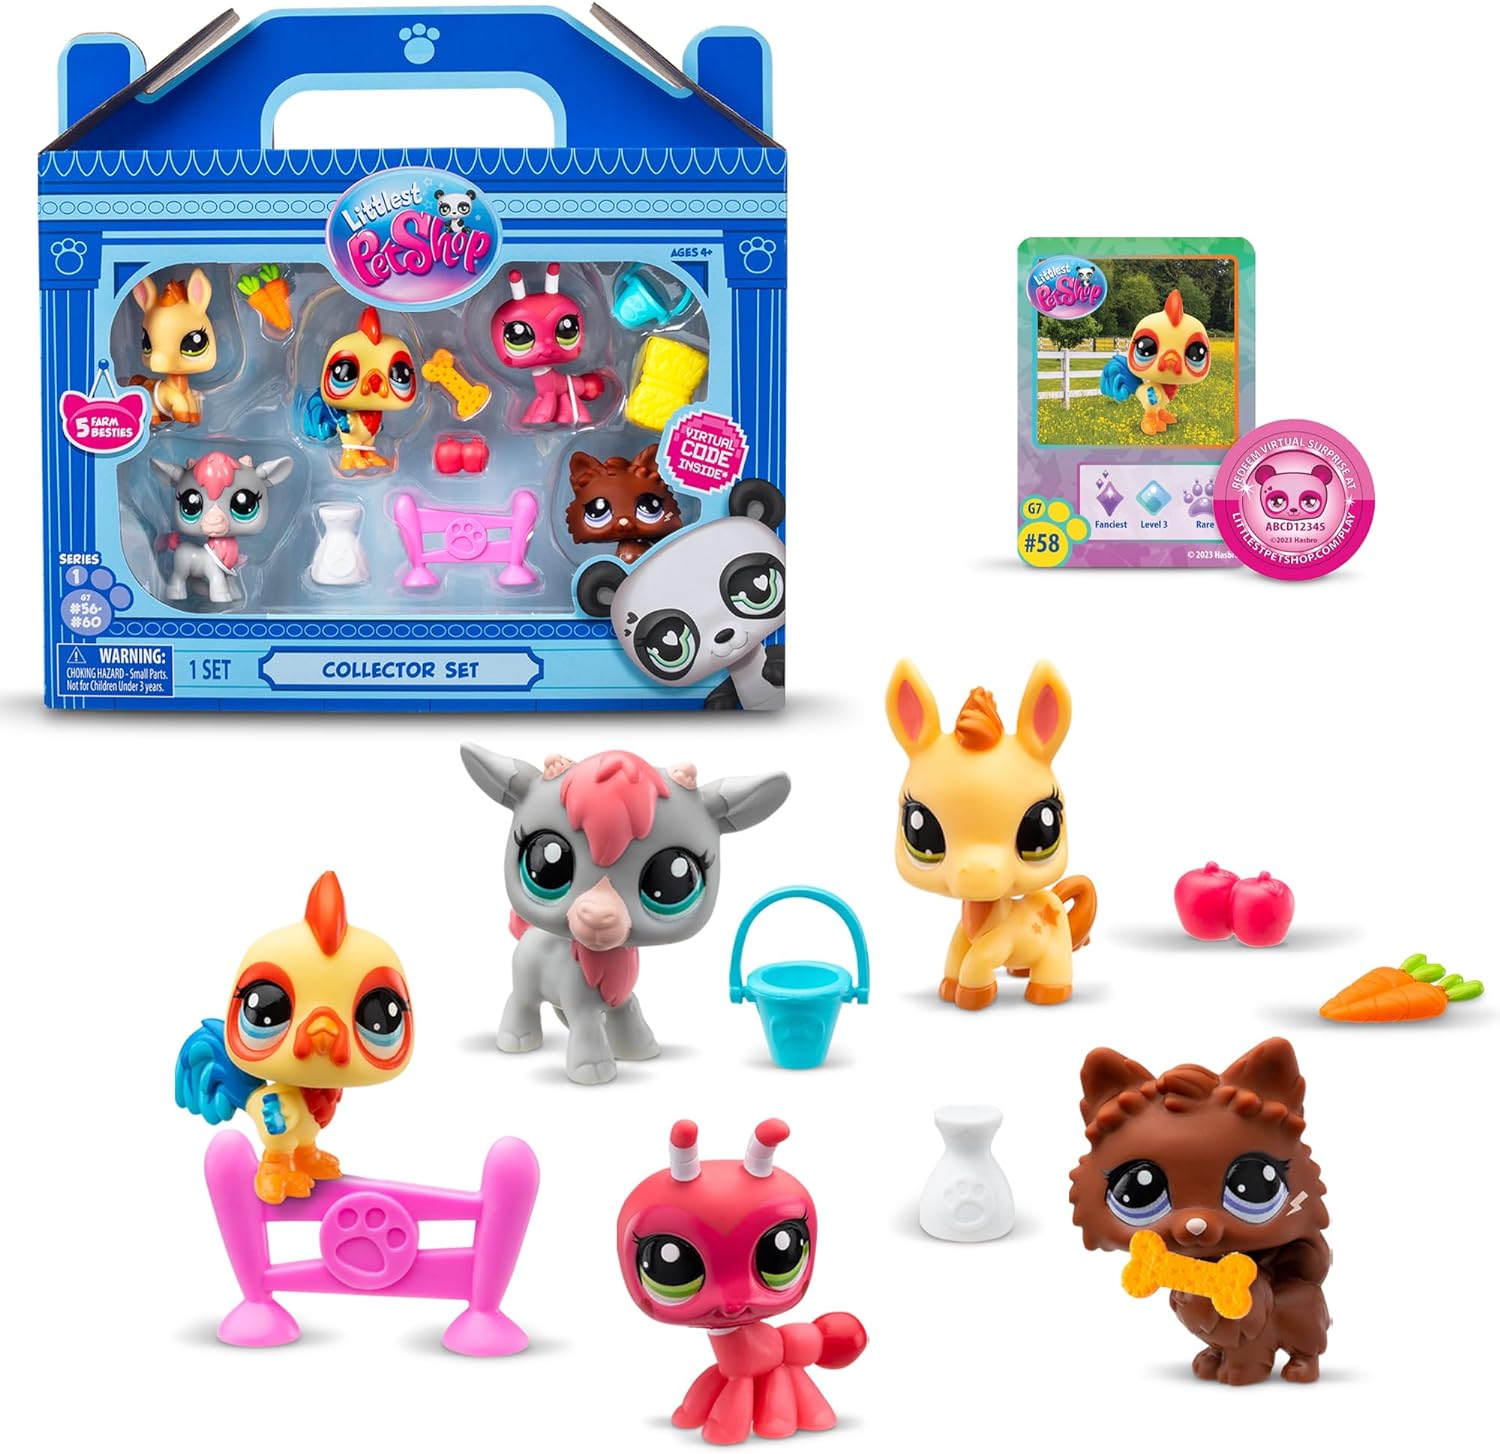 Littlest Pet Shop toys are back - new gen 7 toys from BasicFun